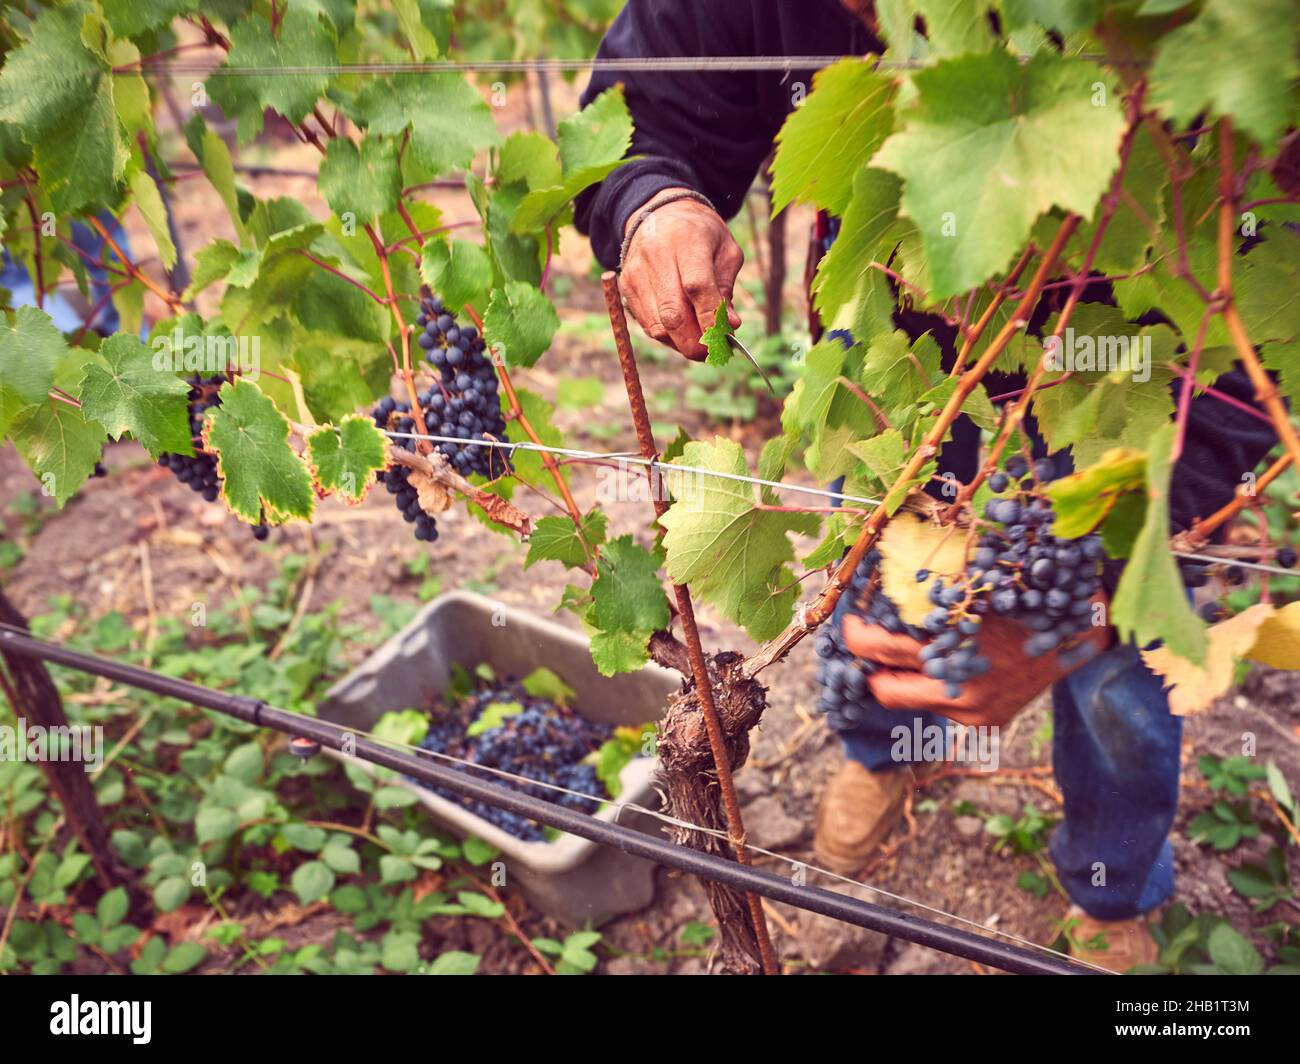 A grape picker cuts wine grapes from the vine during harvest. Stock Photo